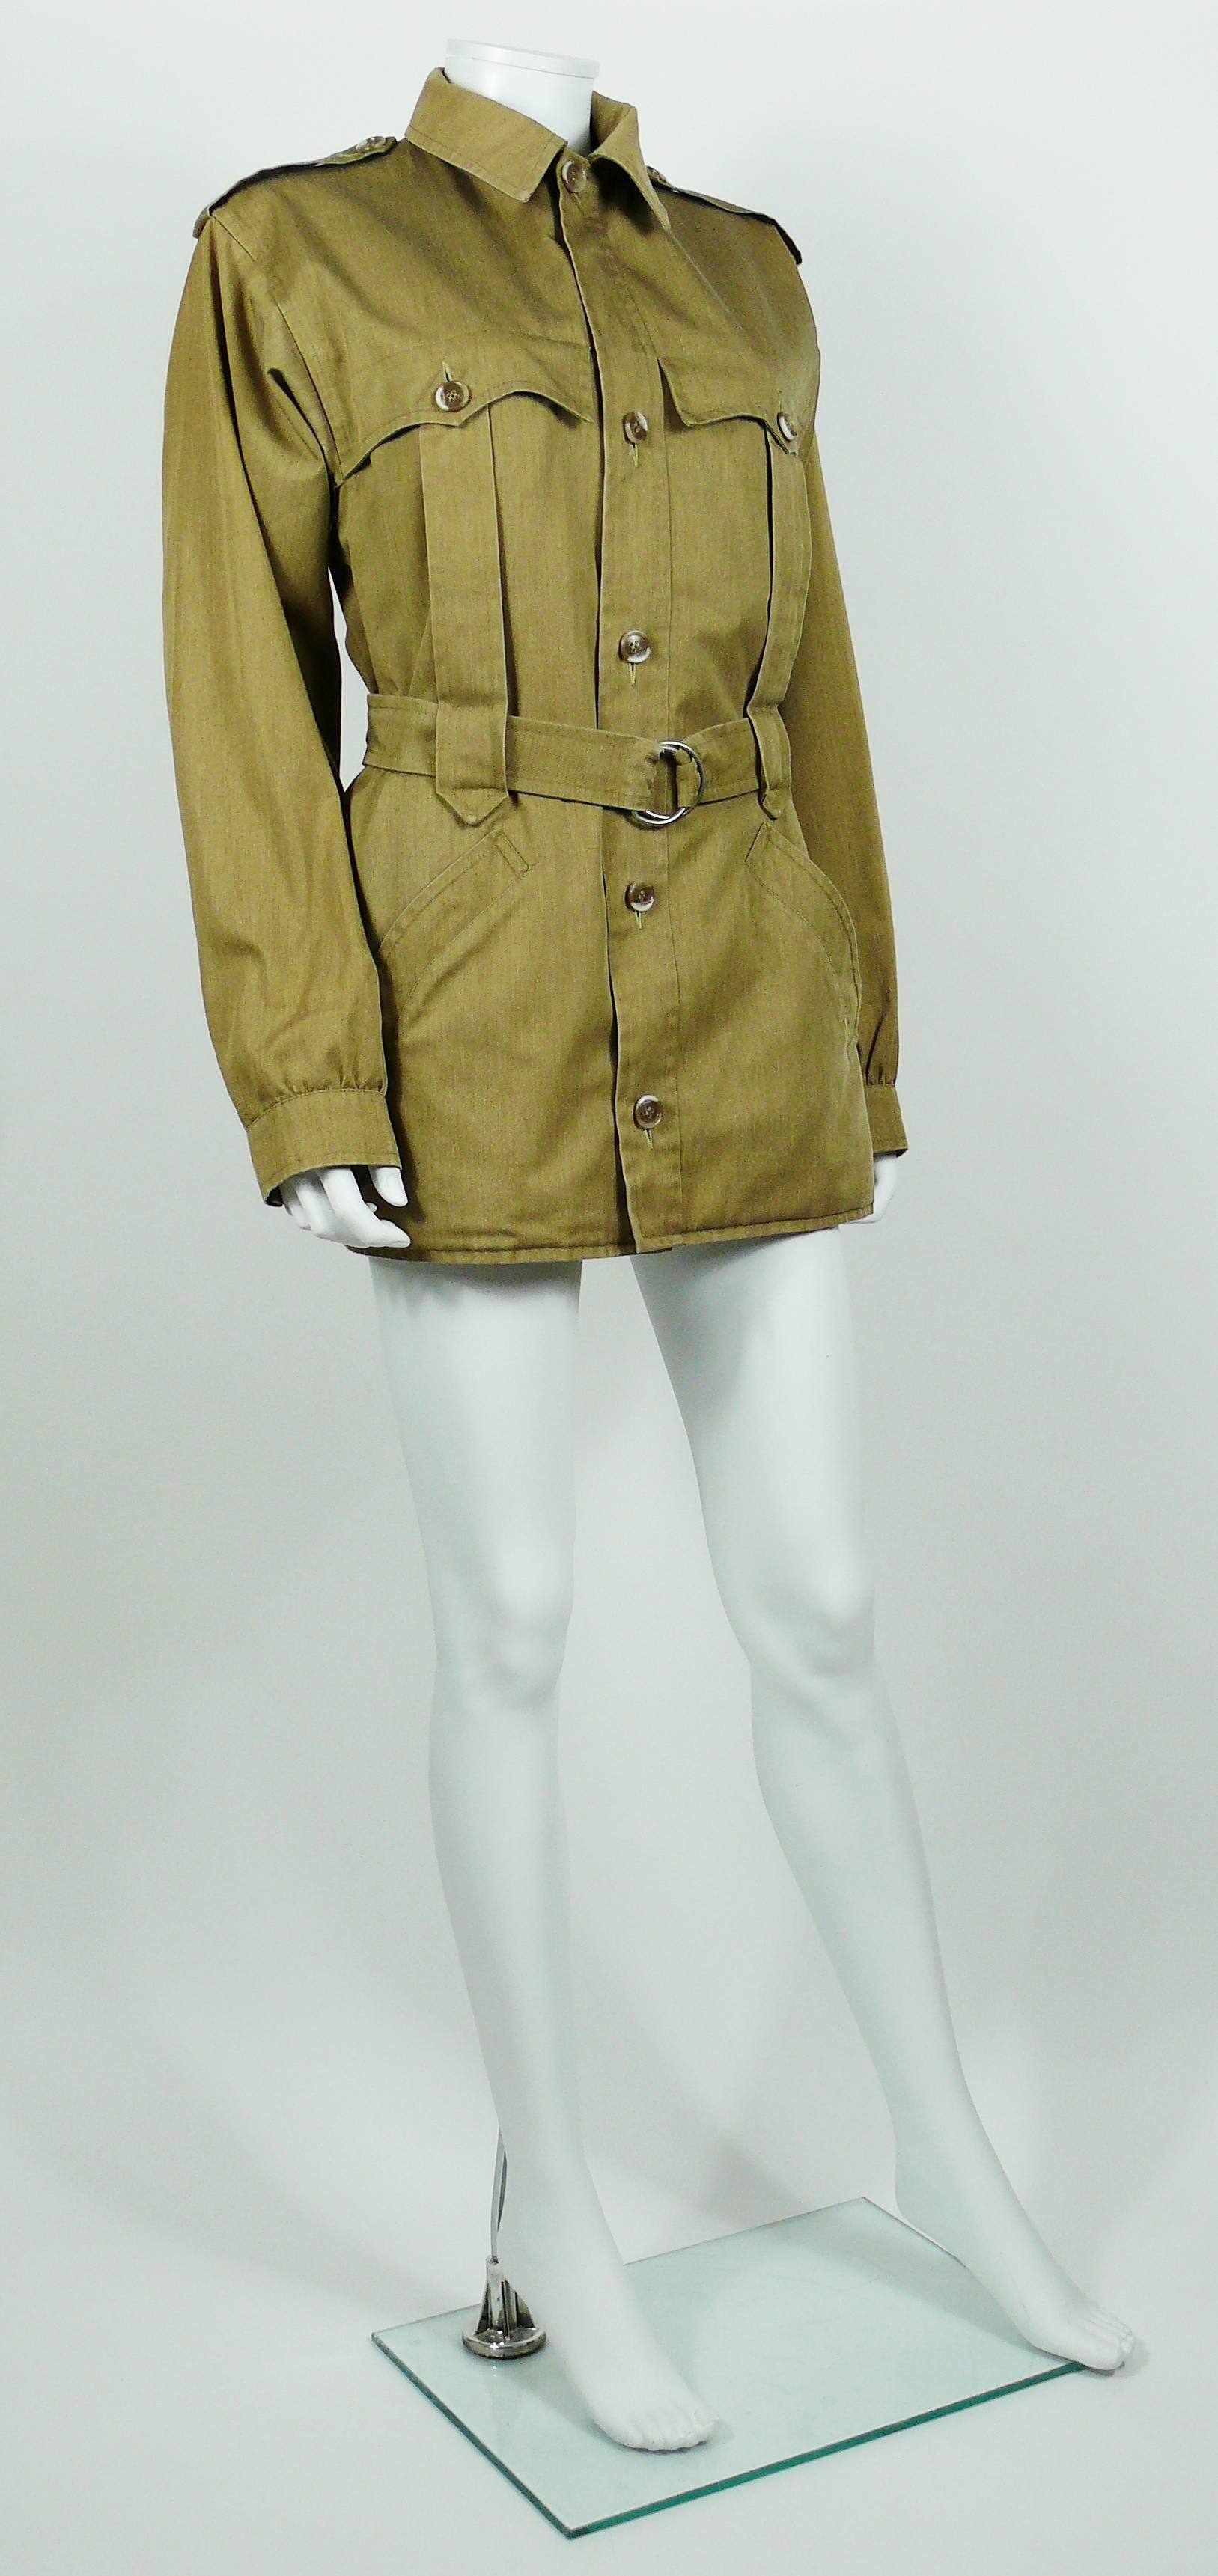 YVES SAINT LAURENT vintage safari jacket.

This jacket features :
- Two patch pockets on breast.
- Two pockets on hips.
- Long sleeves.
- Adjustable belt with silver toned rings buckle.
- Front buttoning.
- Buttoning sleeves.
- Epaulettes.

Label